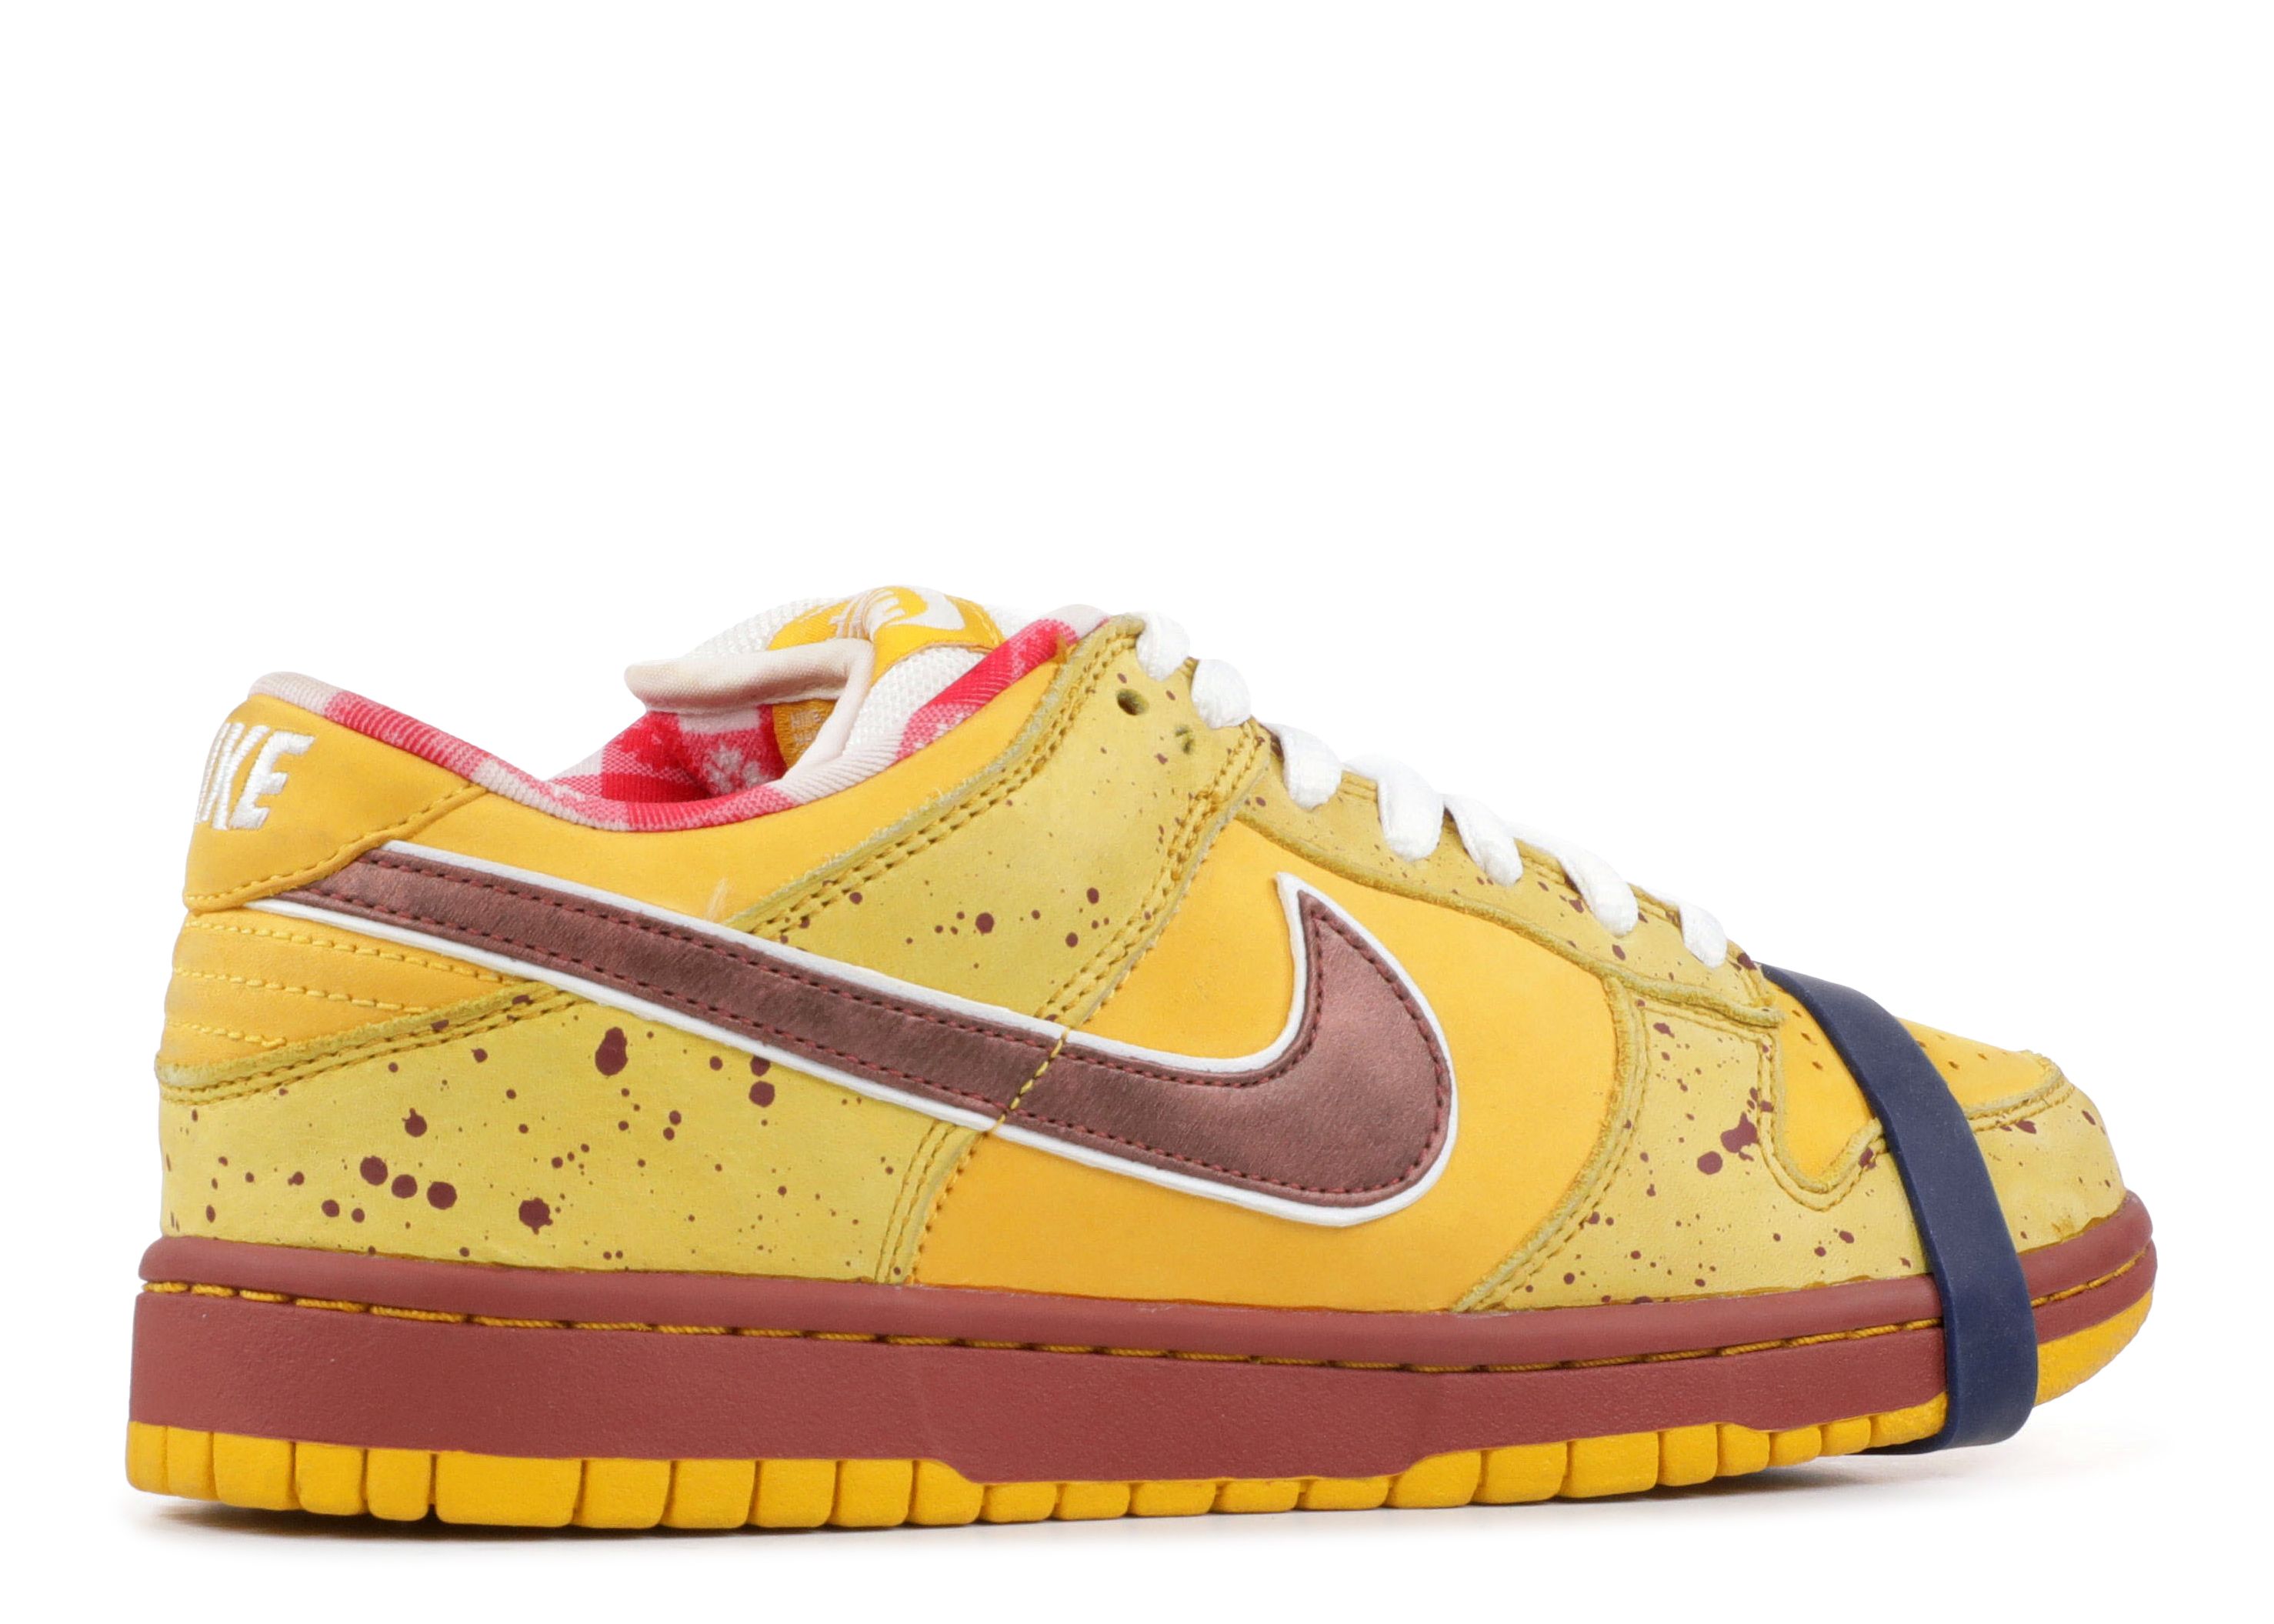 the yellow lobster shoes